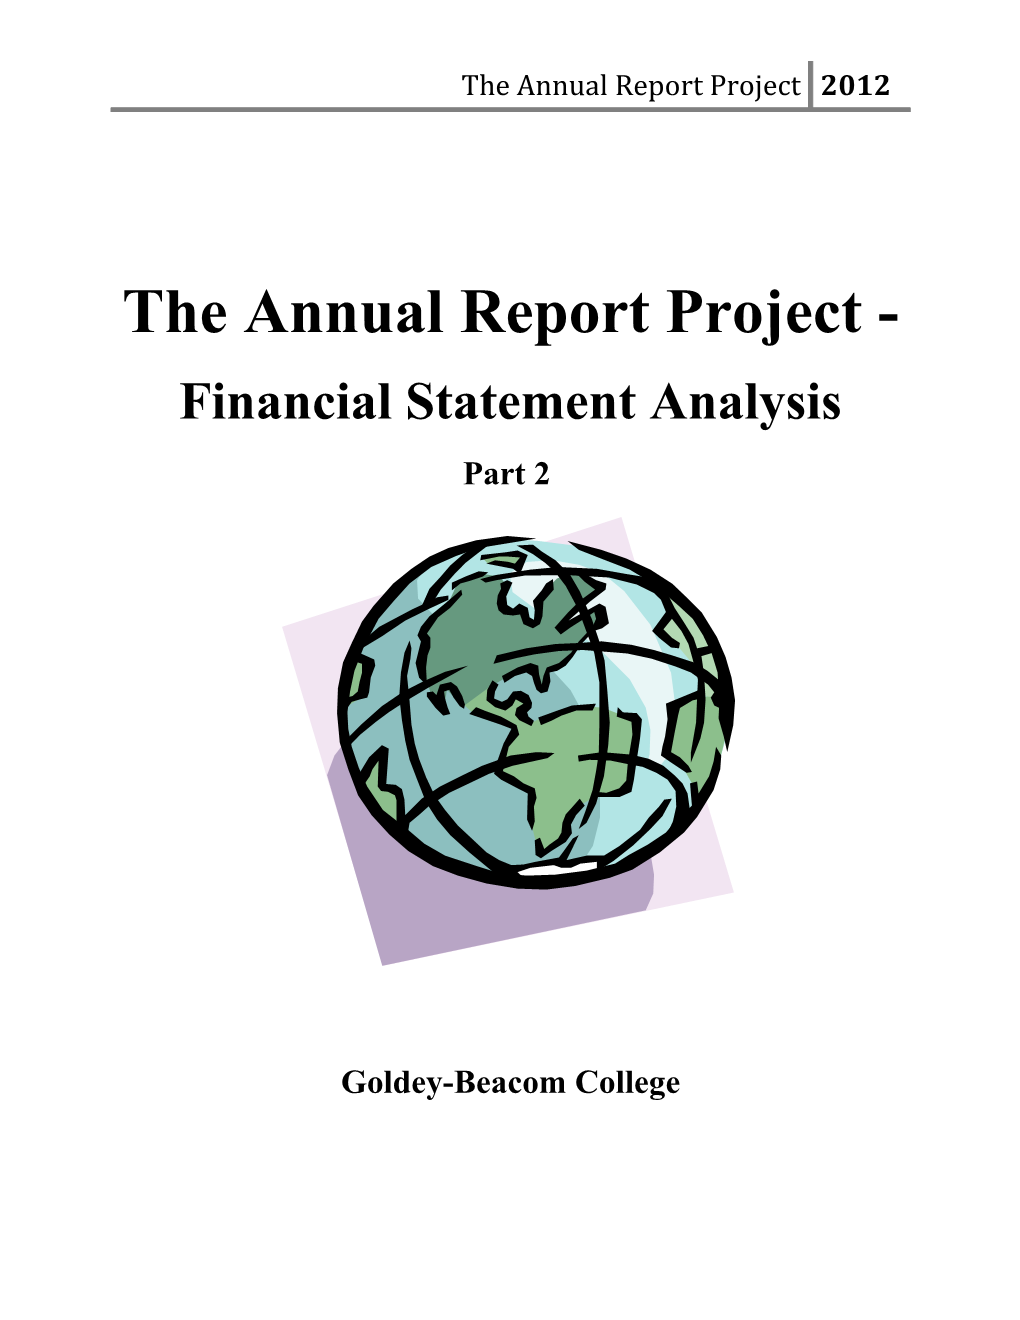 The Annual Report Project